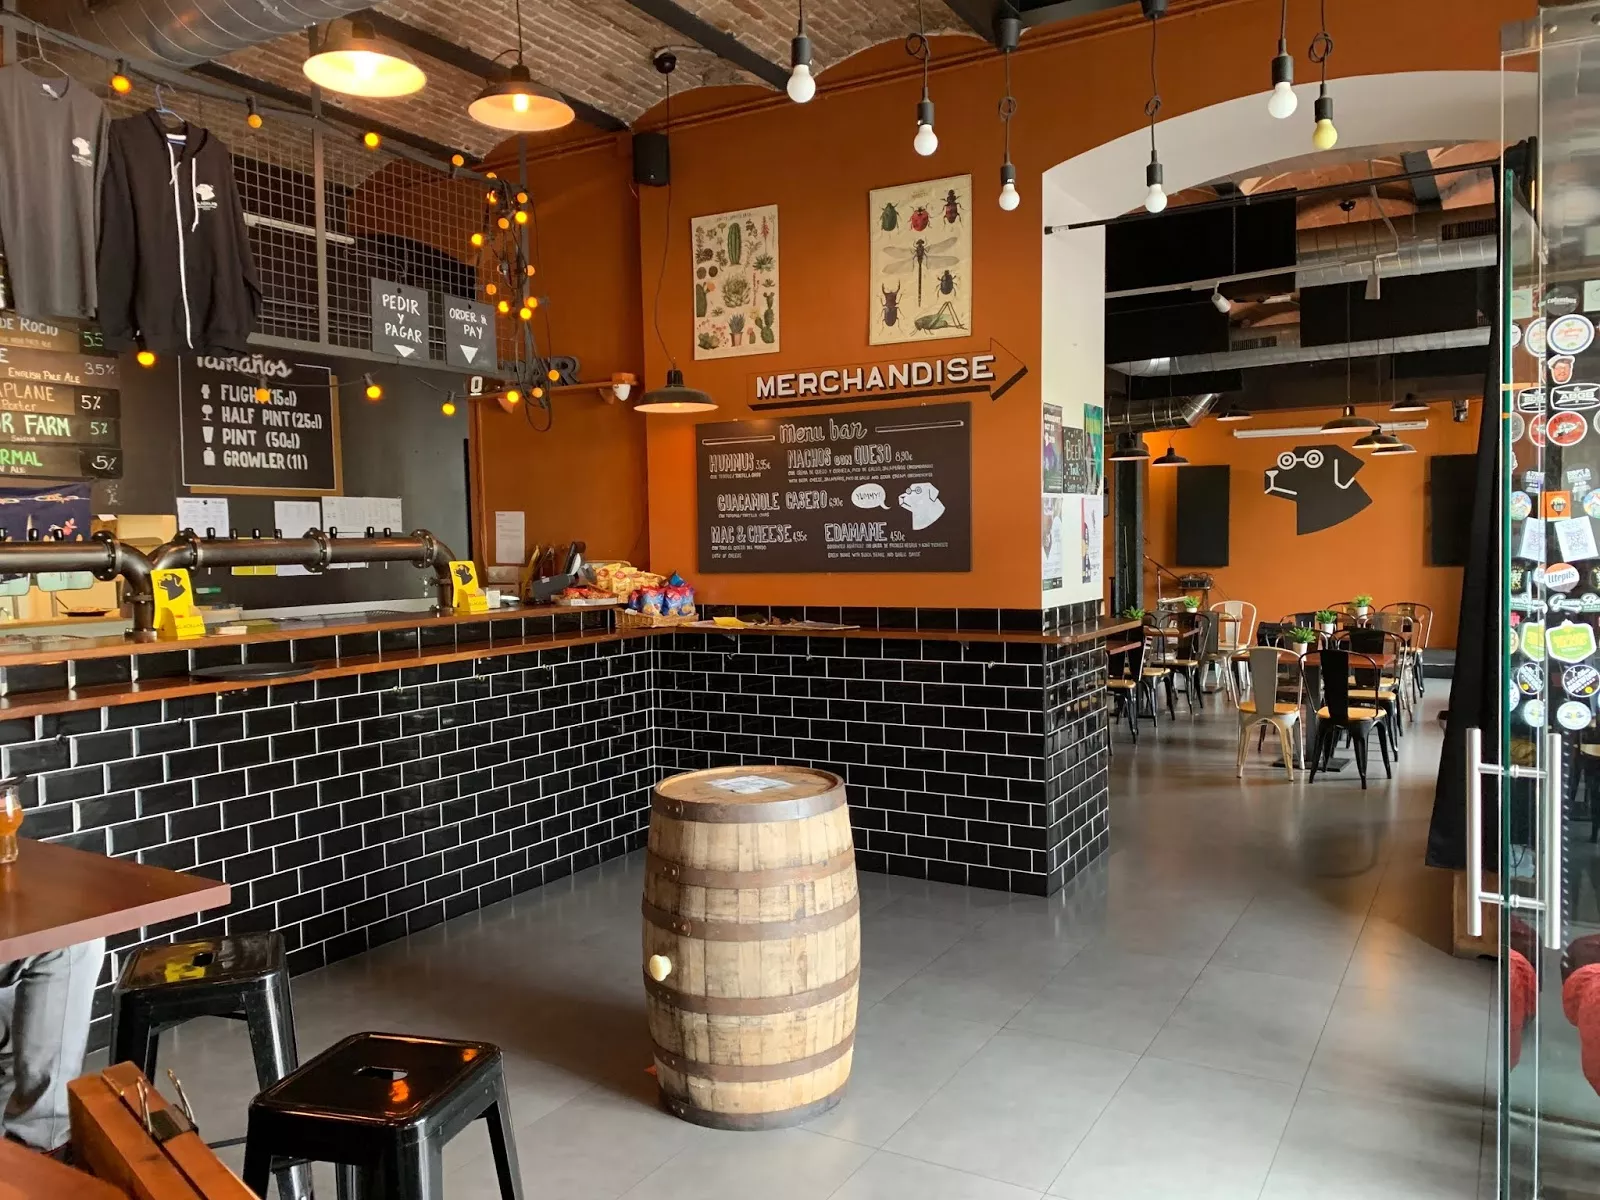 BlackLab Brewhouse & Kitchen in Spain, Europe | Pubs & Breweries - Rated 3.5